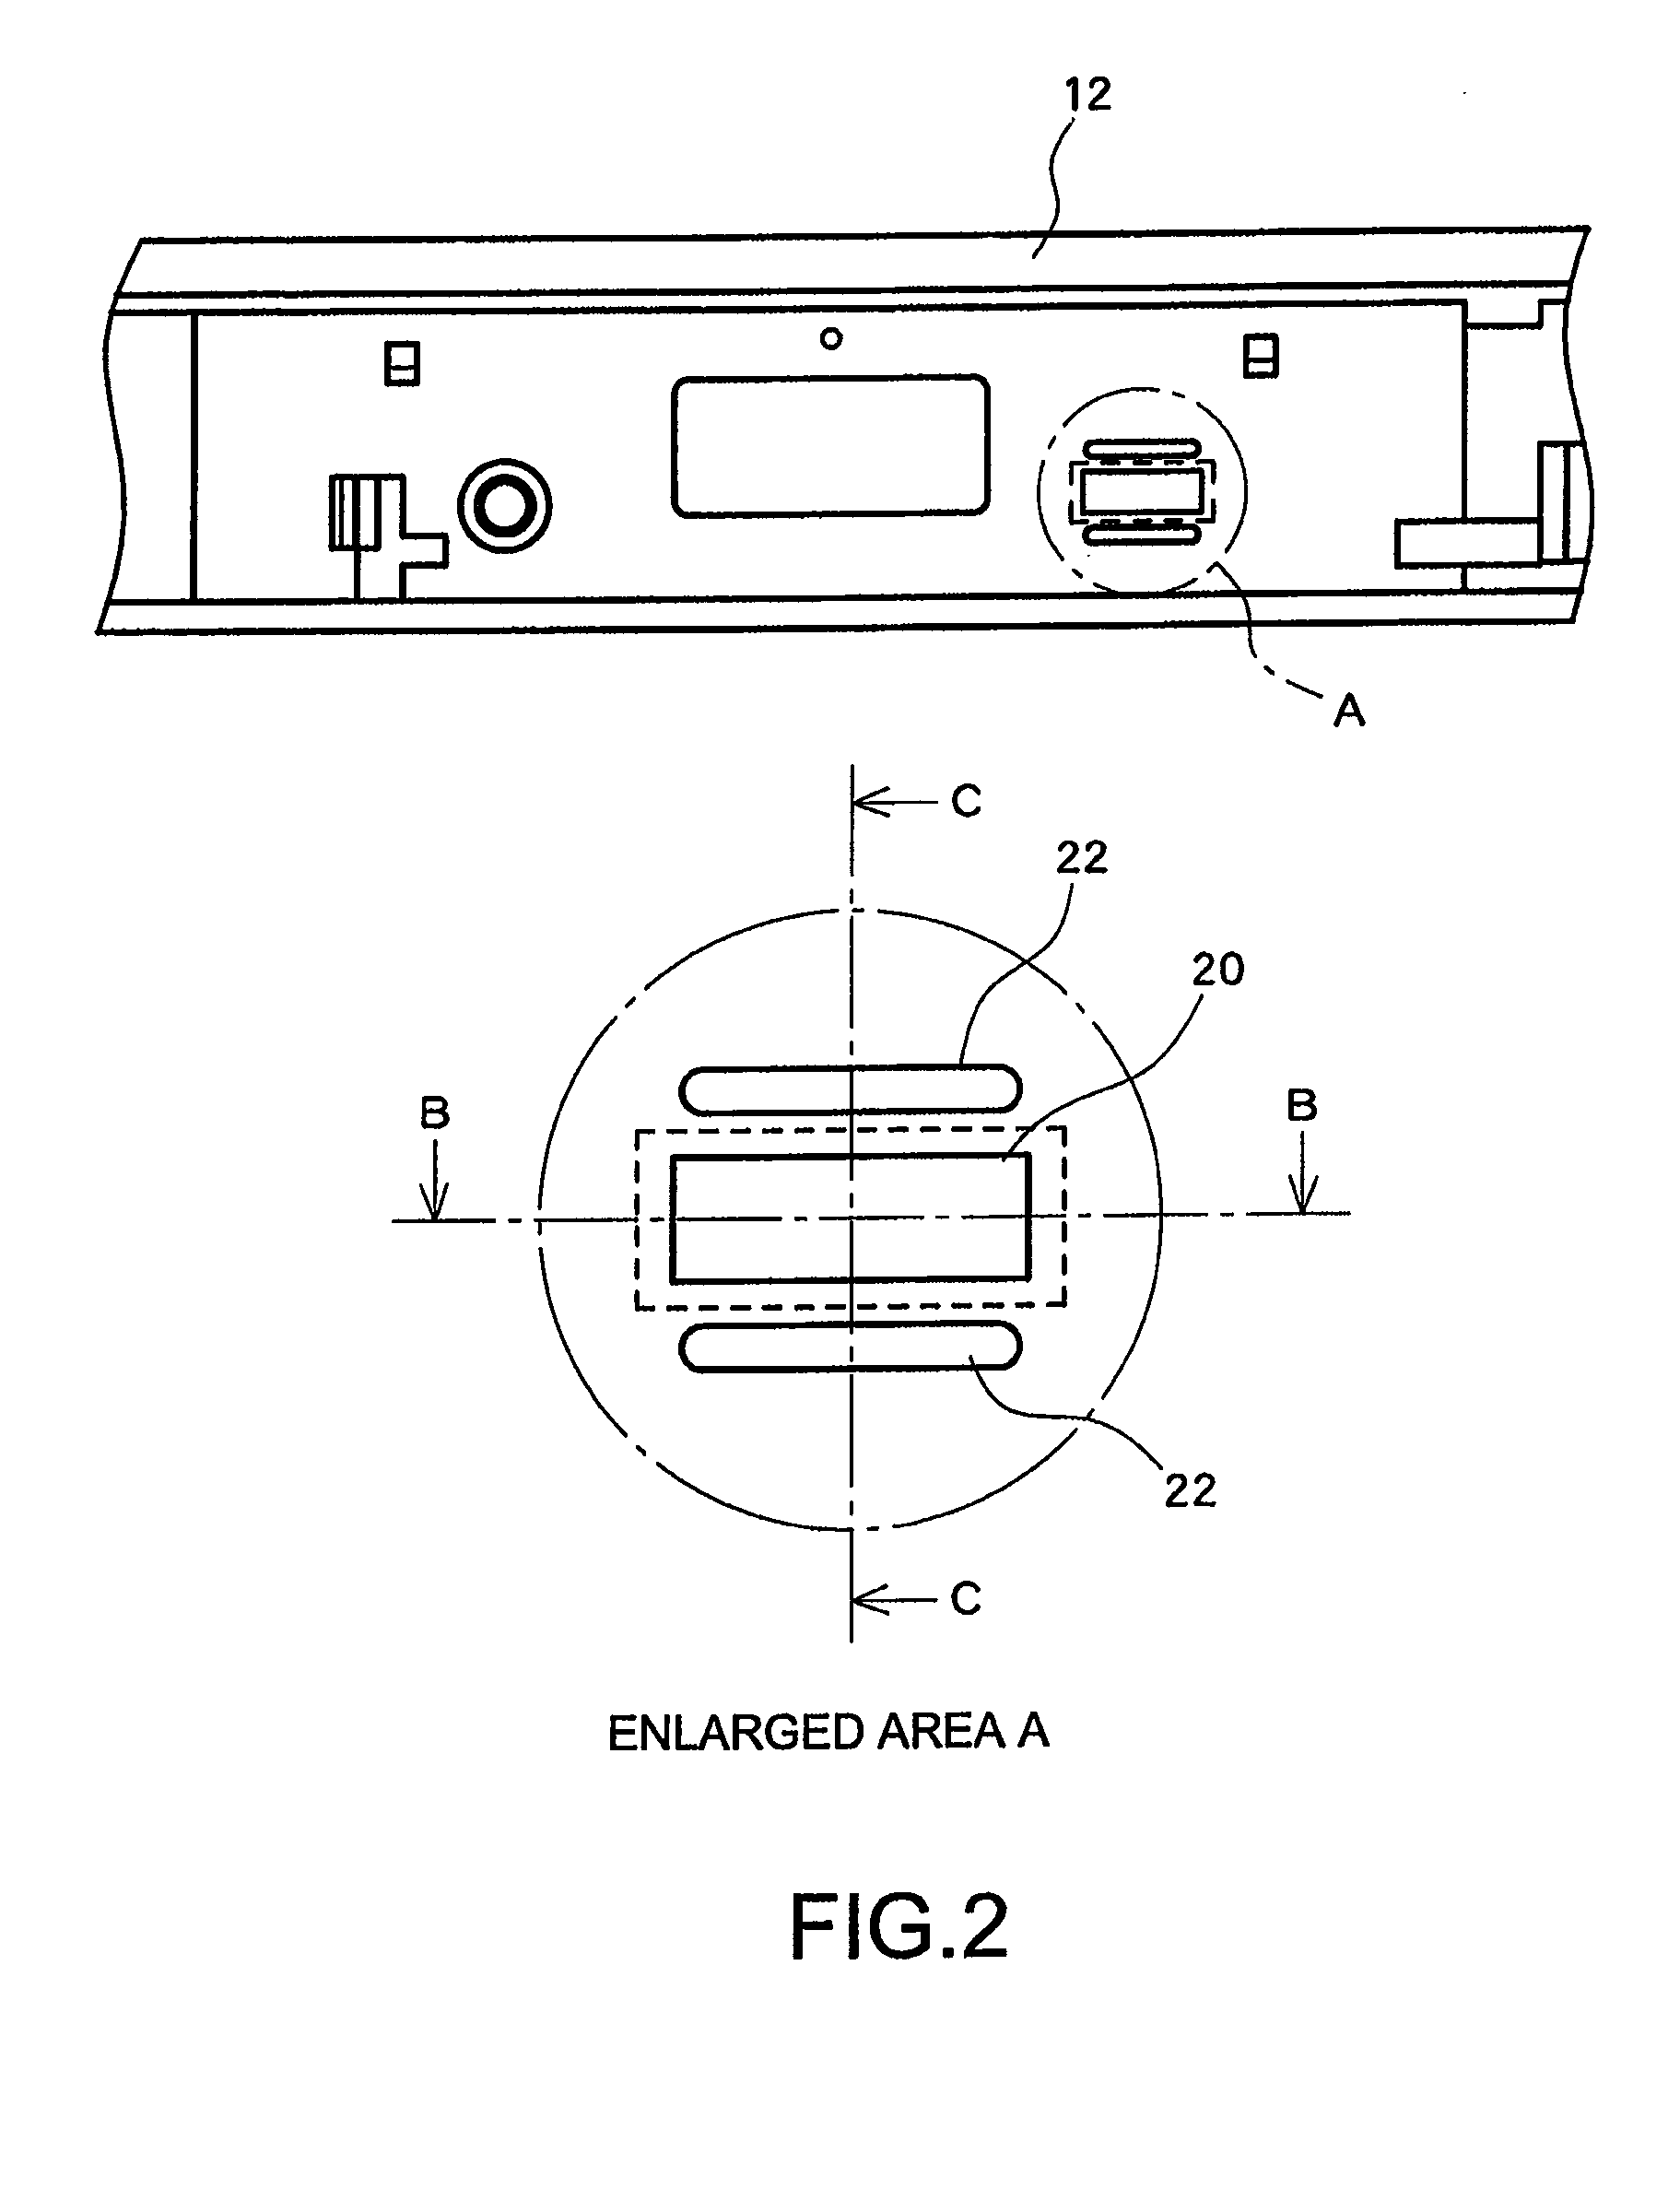 Electronic device and method for attaching light guide lens